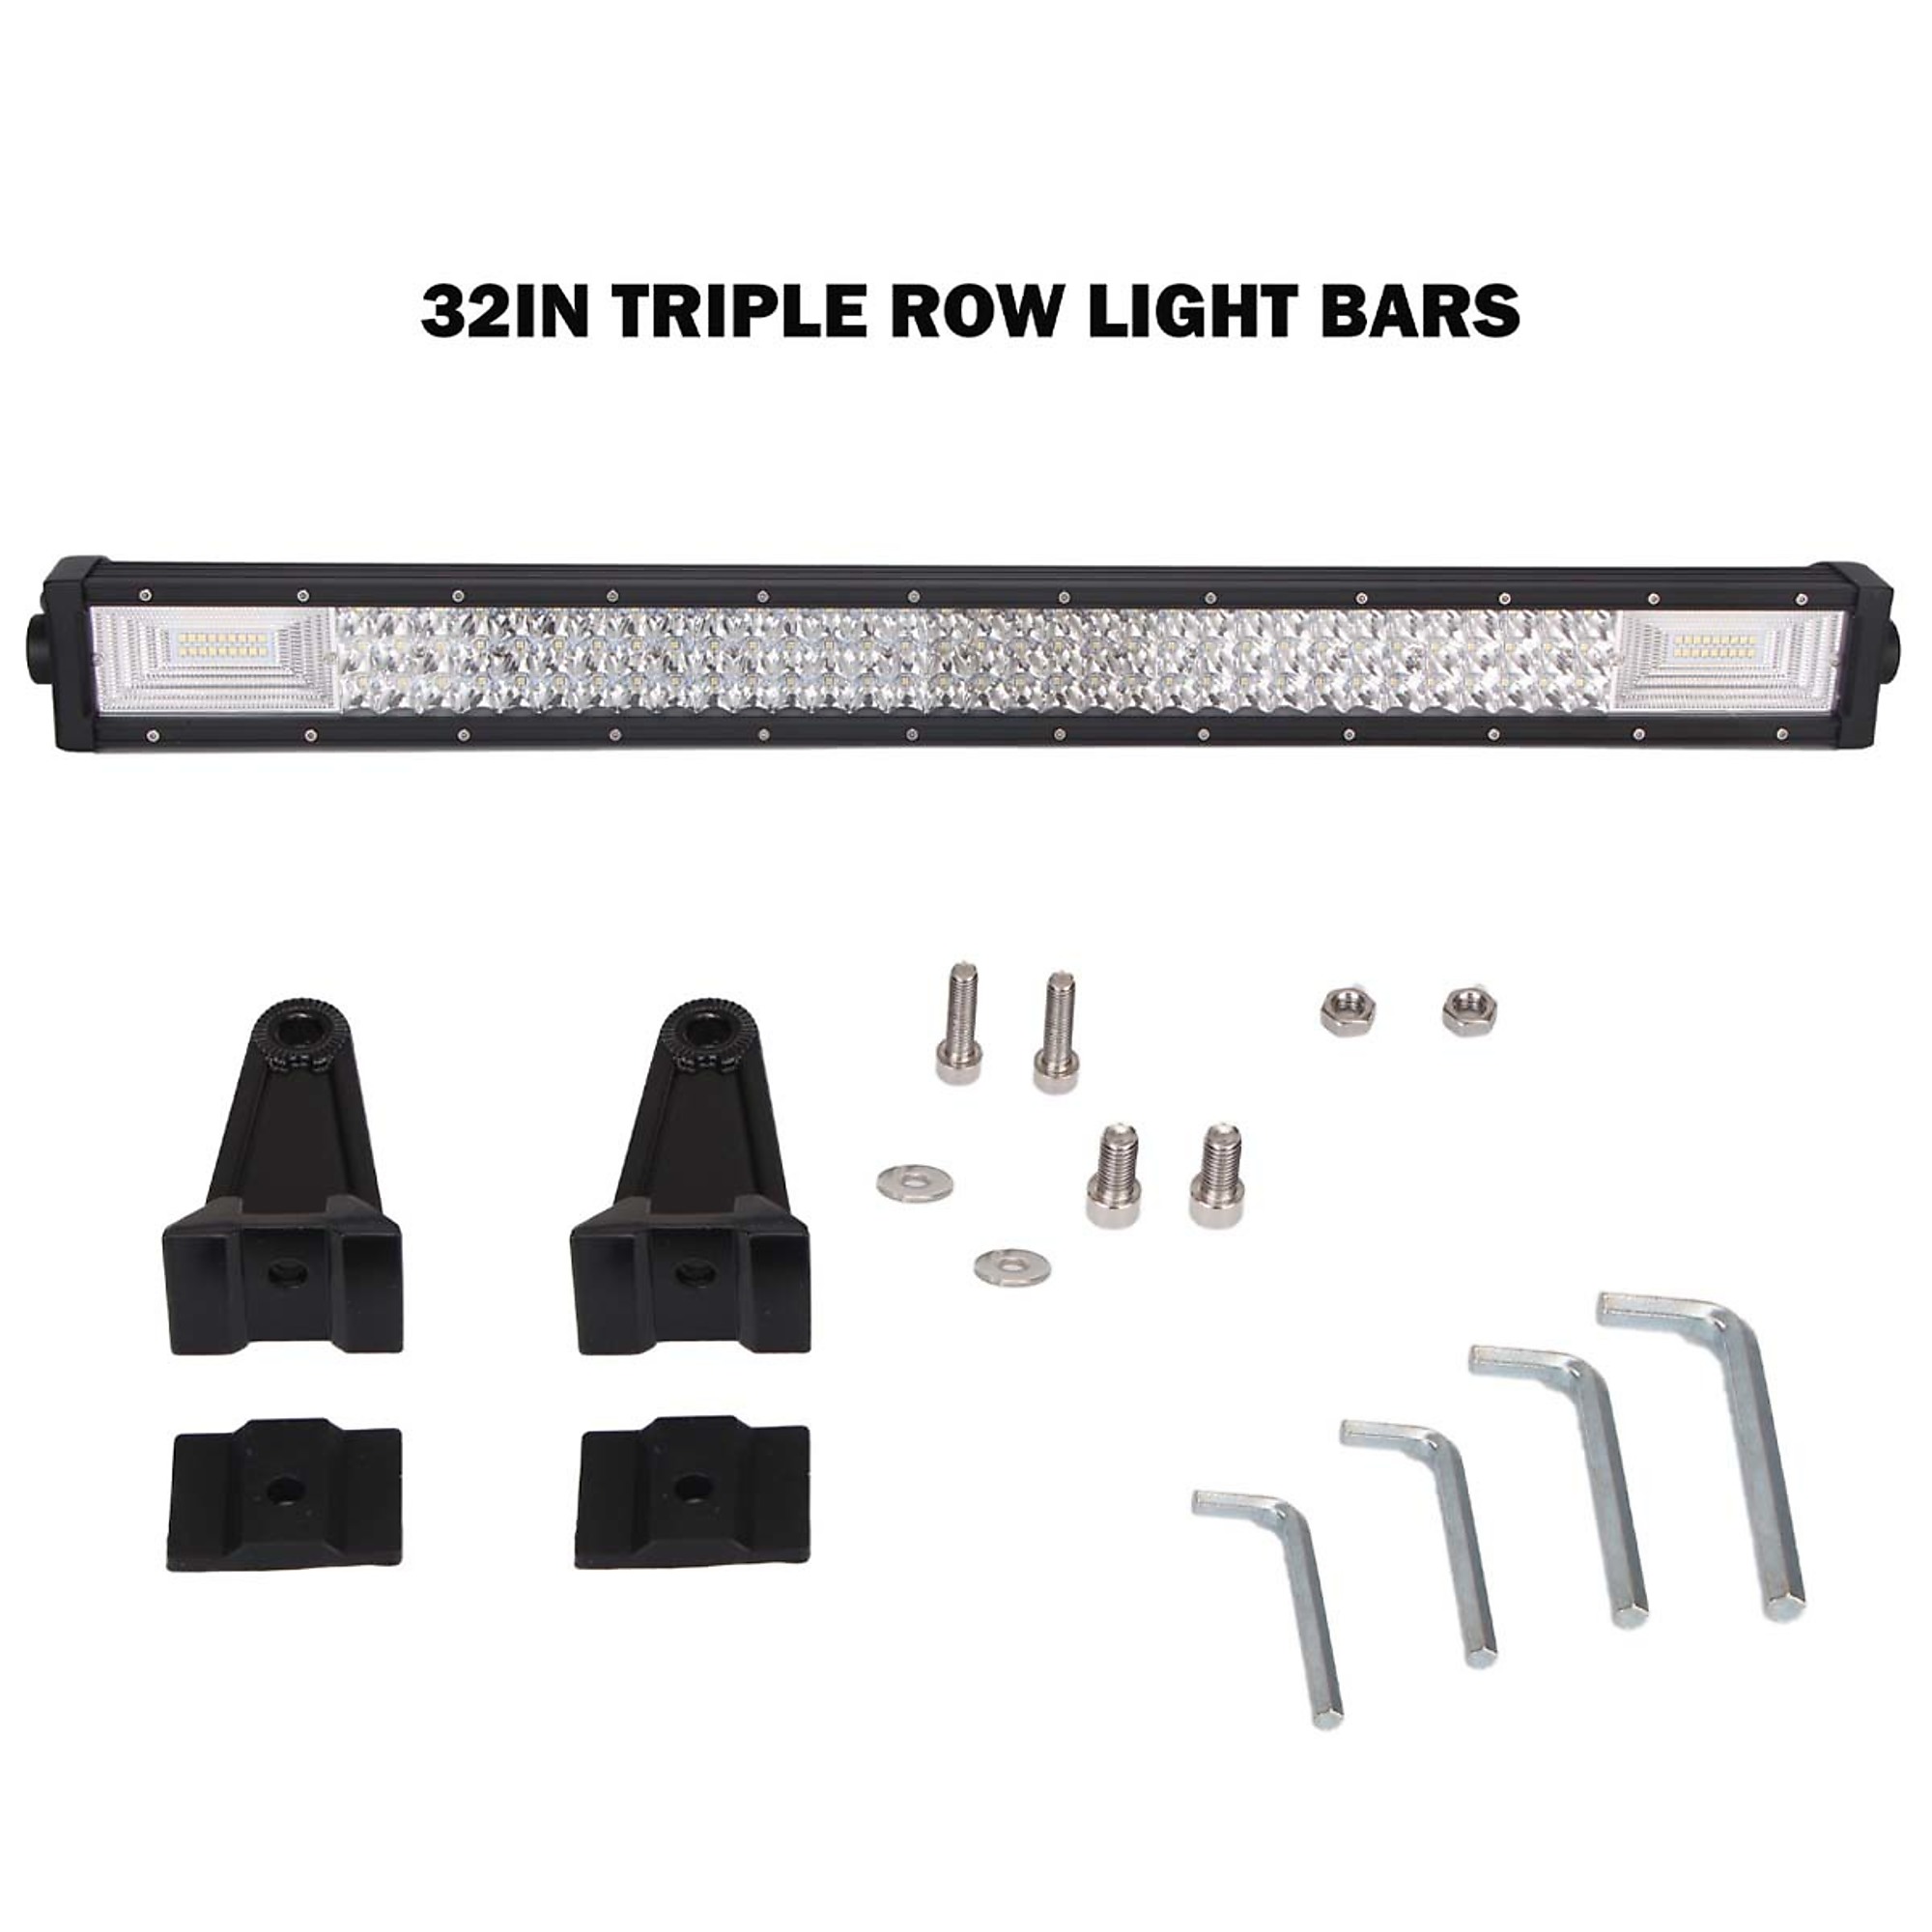 Race Sport Lighting, Excursion Series 32Inch 180W LED Light Bar 3-Rows, Light Type LED, Lens Color Clear, Included (qty.) 1 Model 1006486